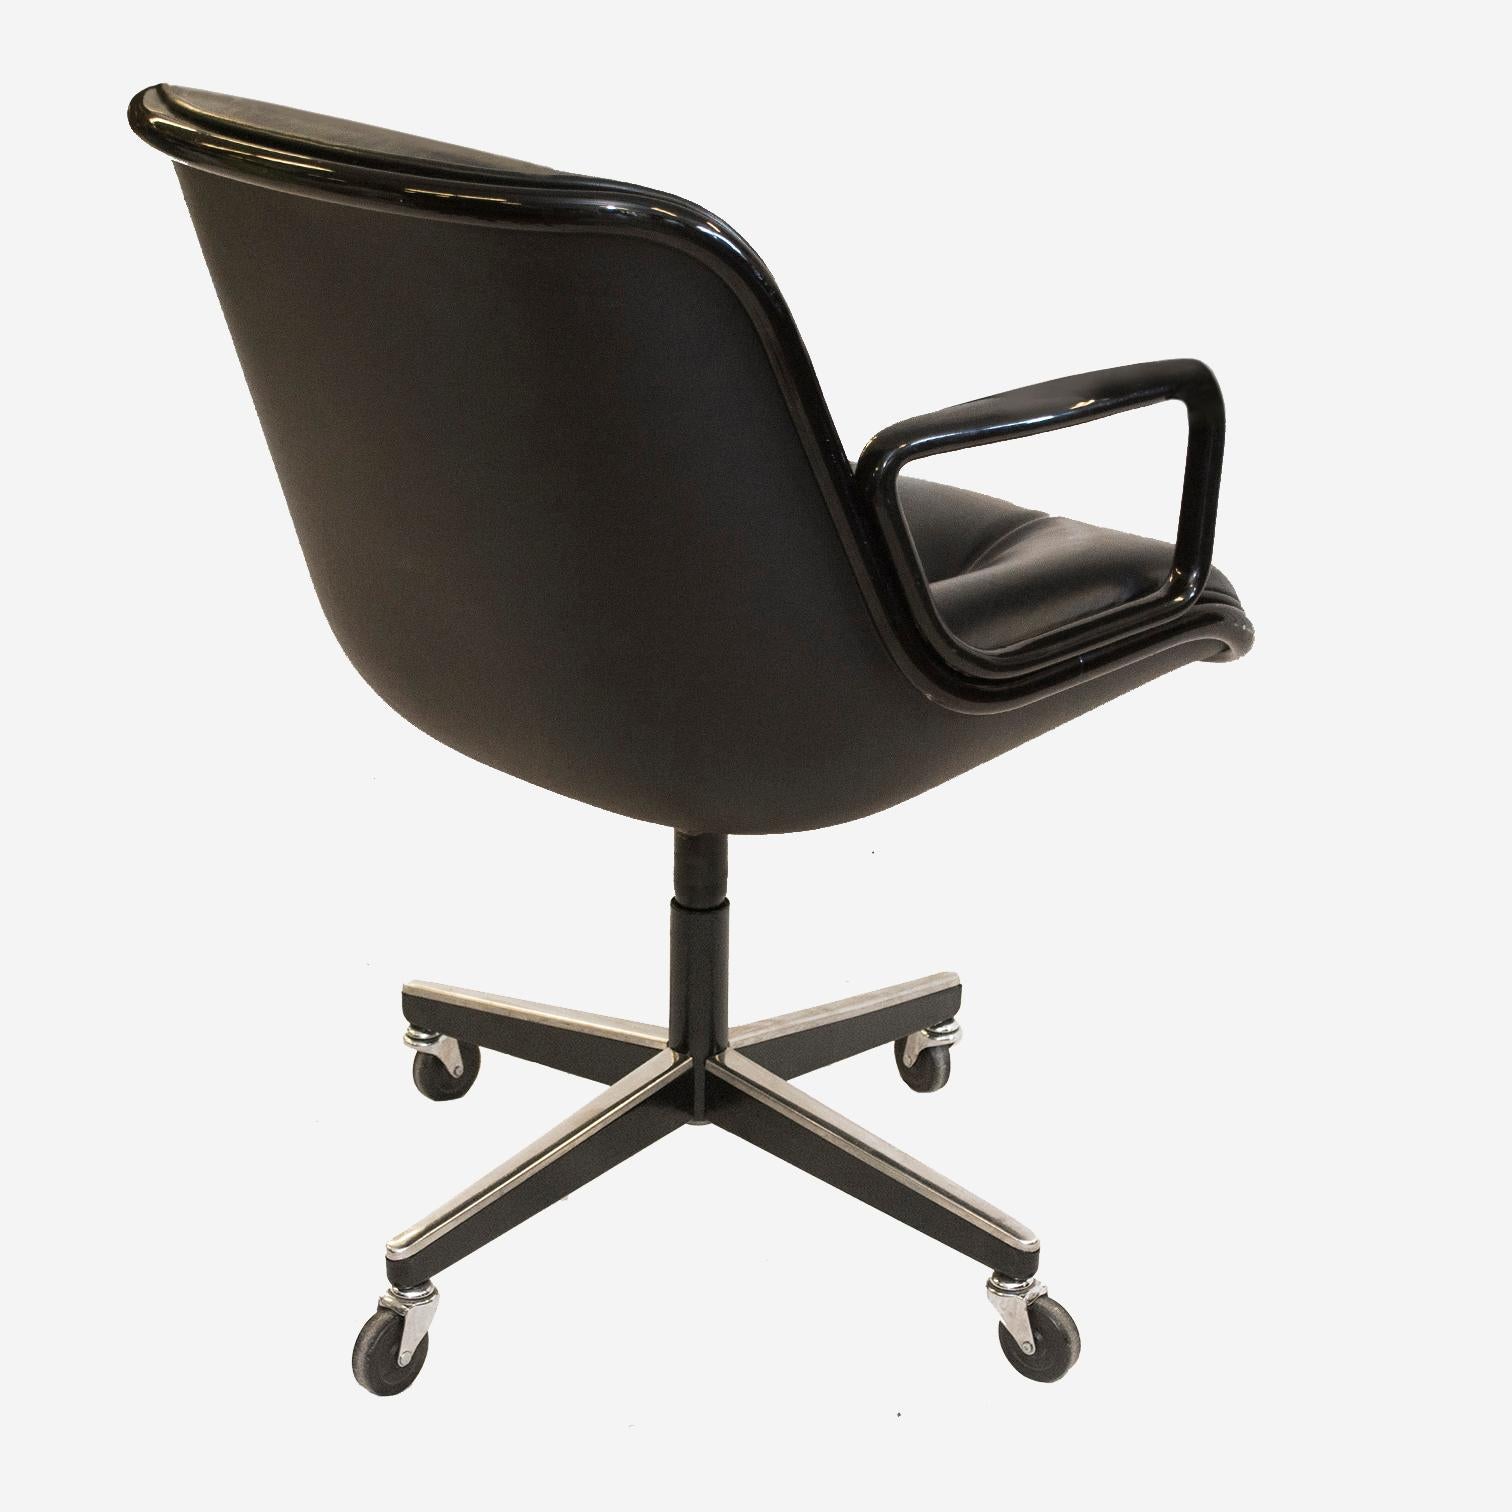 North American Knoll Pollock Executive Chair reupholstered in Italian Leather, Matte Black